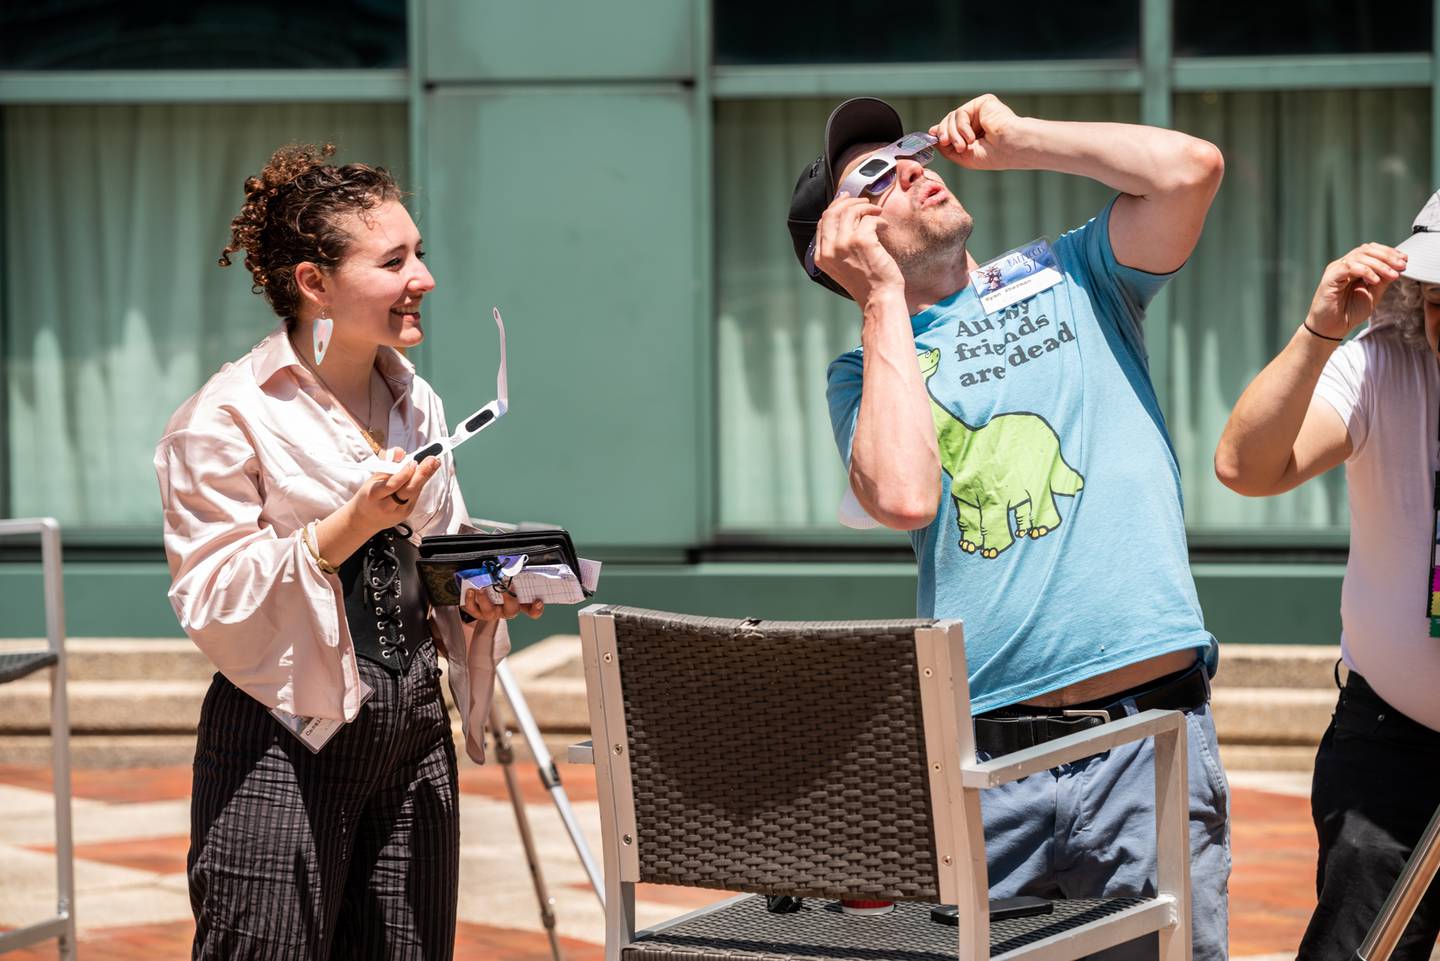 (L to R) Cassie Gologorsky and Ryan Sherman, both of Manchester, New Hampshire, use special protective glasses to look at the sun during the Safe Solar Observation workshop. Balticon 57 at Renaissance Harborplace Hotel, Baltimore, Maryland.